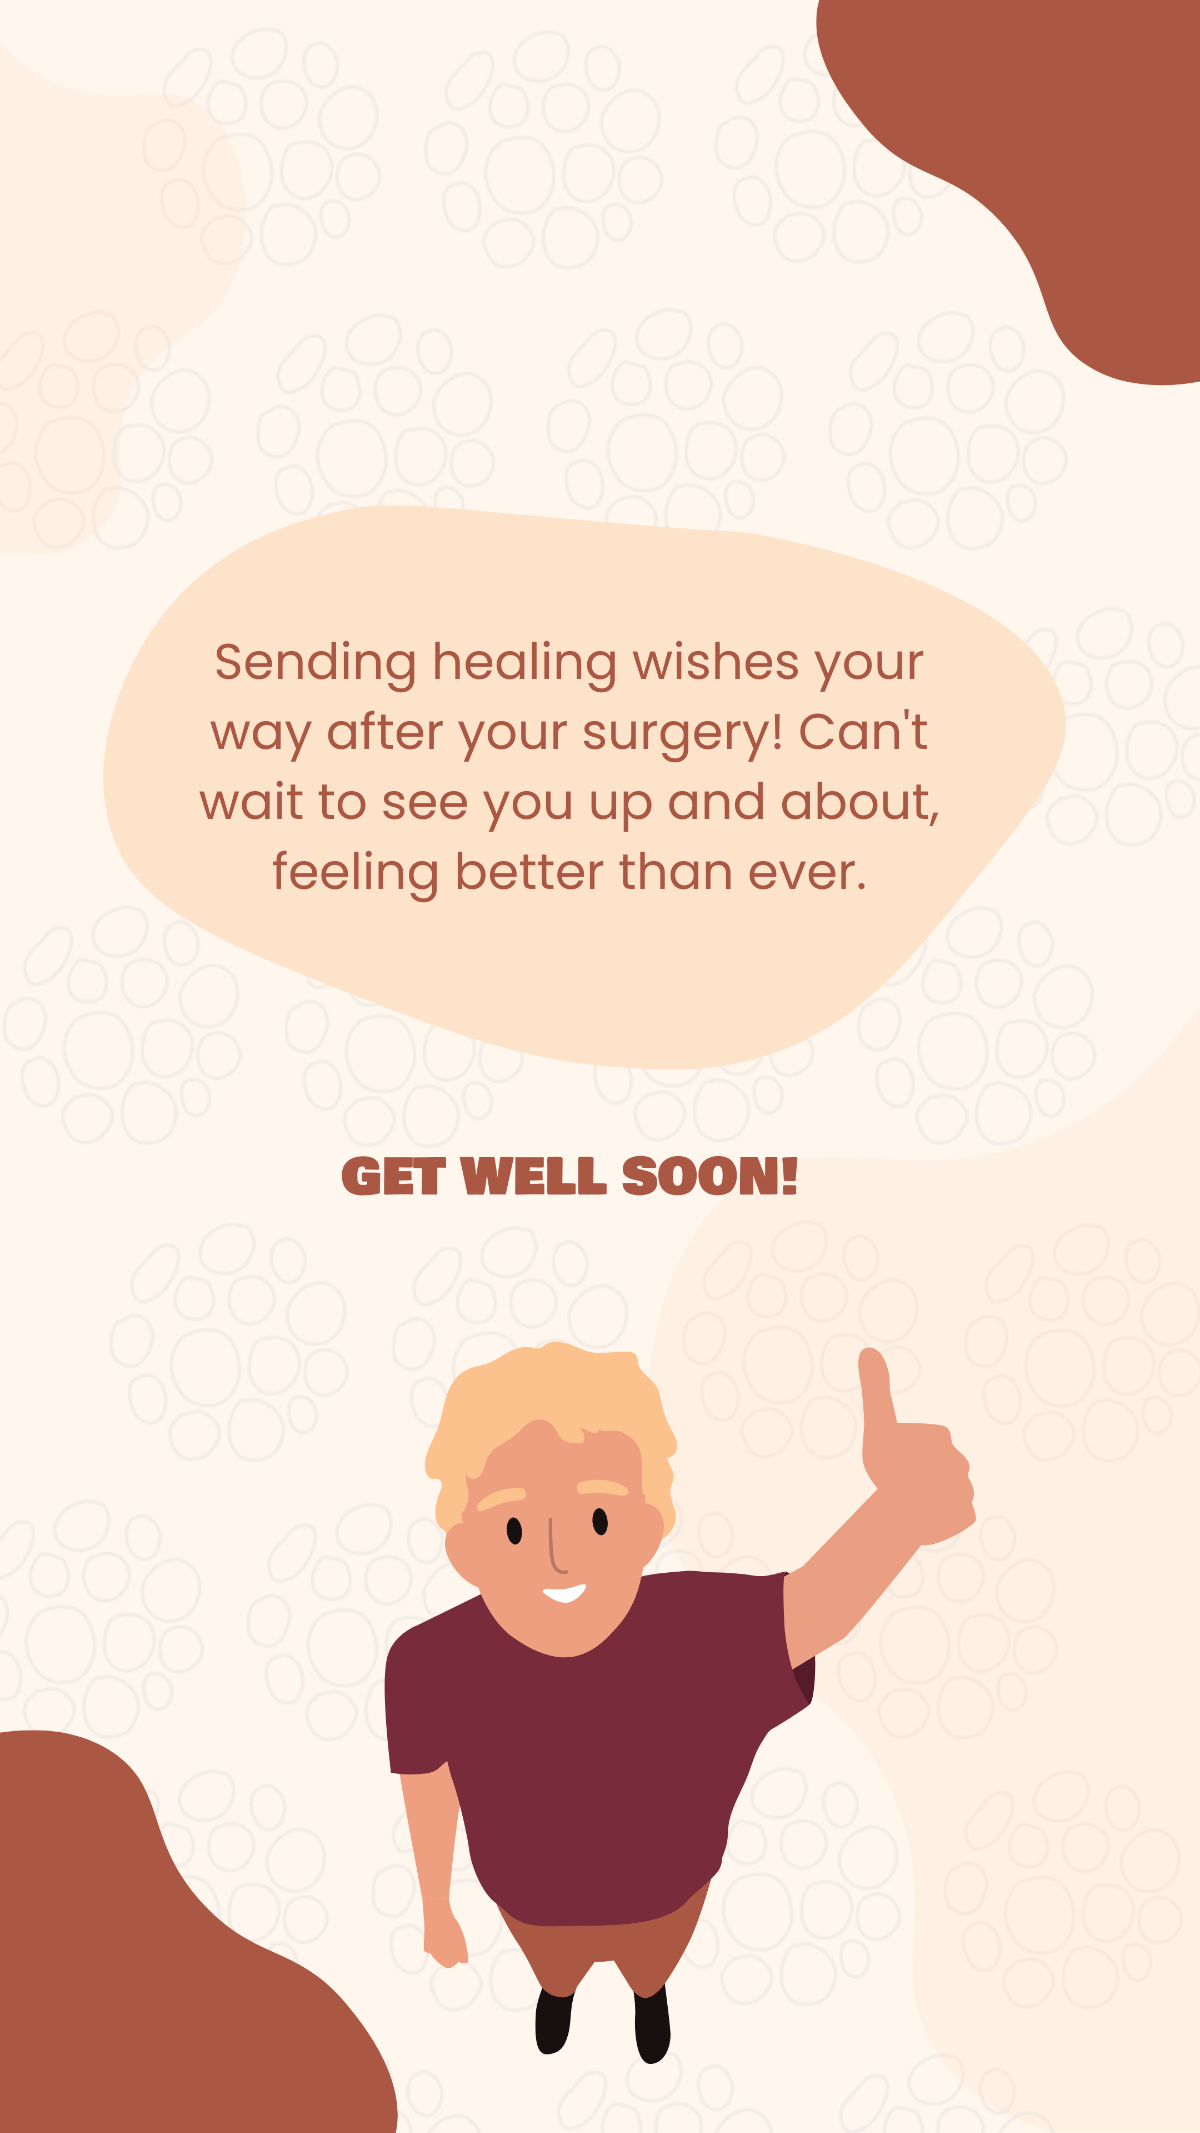 Get Well Soon Message After Surgery Template